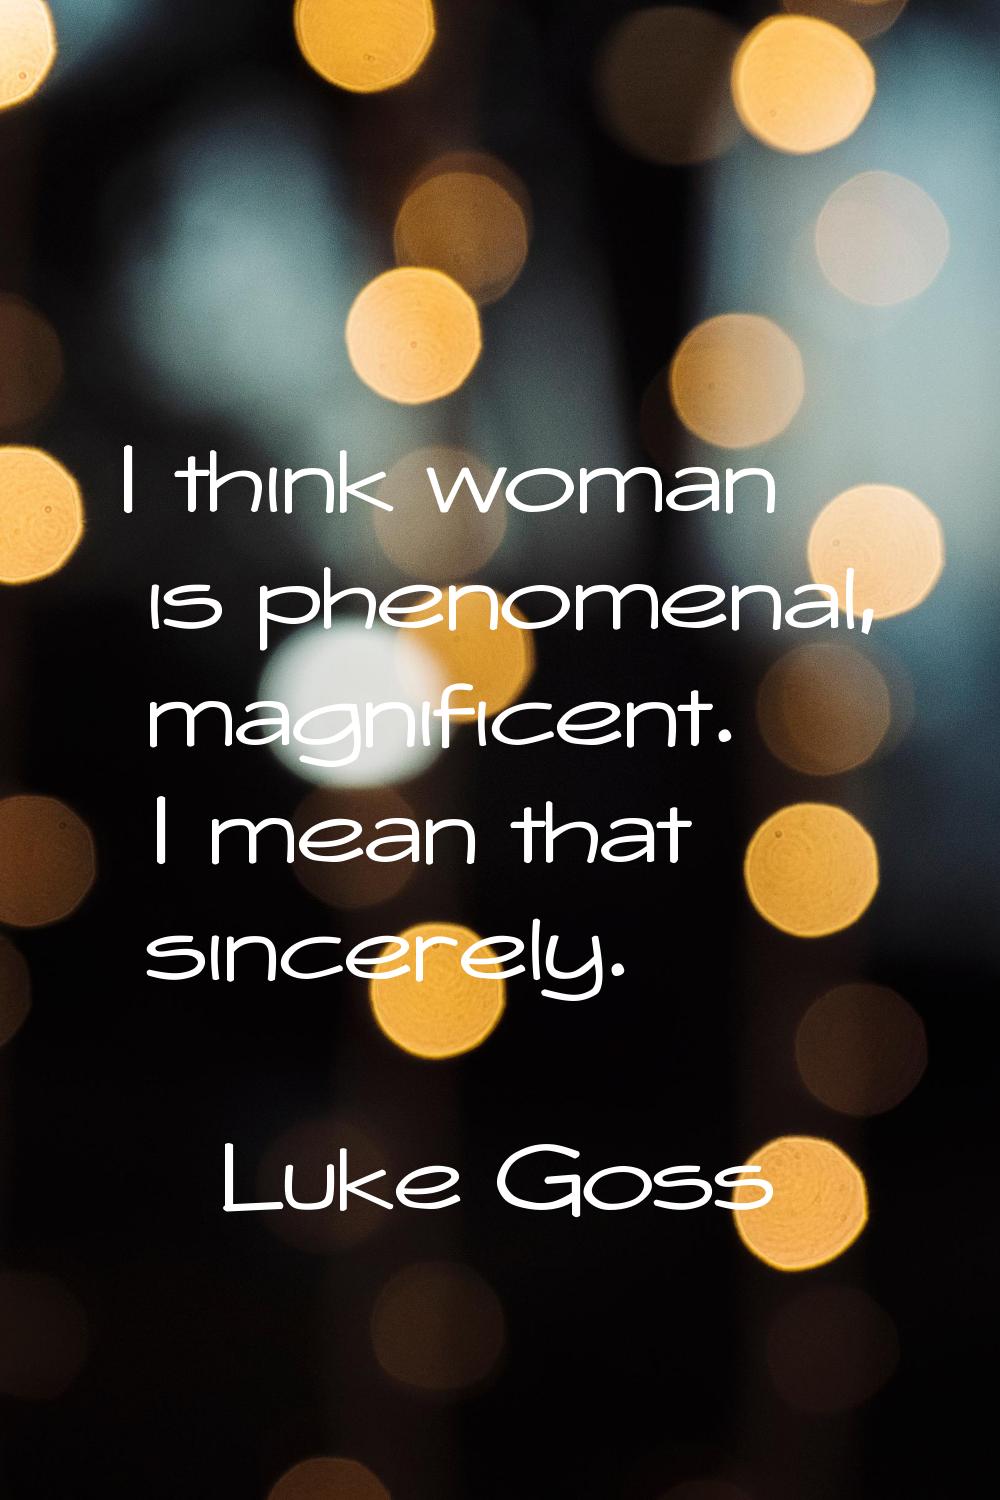 I think woman is phenomenal, magnificent. I mean that sincerely.